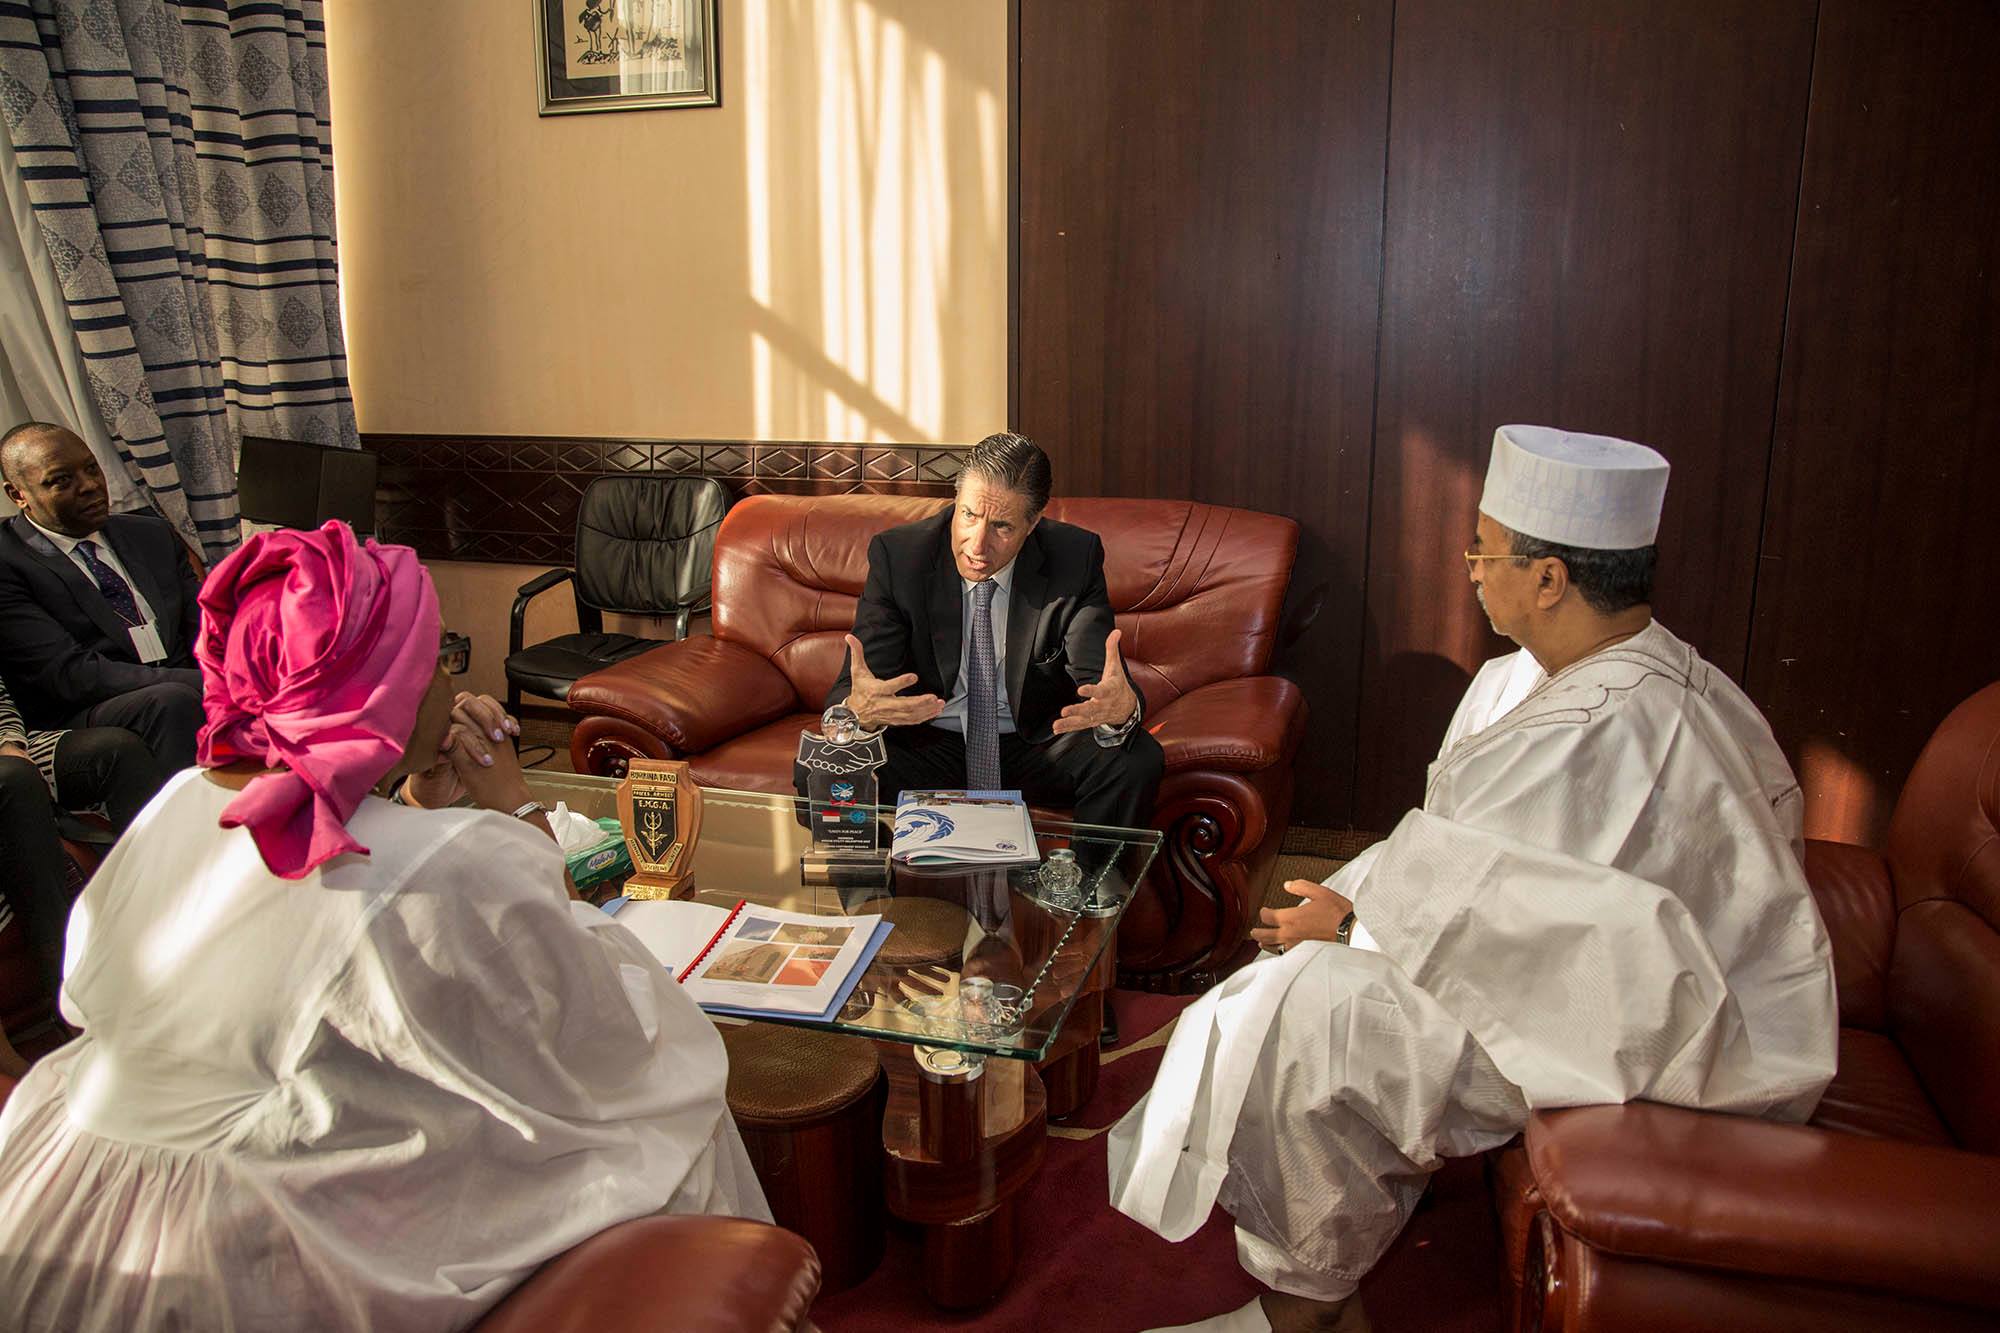 Head of MINUSMA Mahamat Saleh Annadif receives Oscar Fernandez-Taranco, Assistant Secretary-General for Peacebuilding Support while visiting Mali. During the visit,  Fernandez-Taranco will seize the opportunity to consult with the Malian authorities on United Nations support to national and international efforts to consolidate peace.